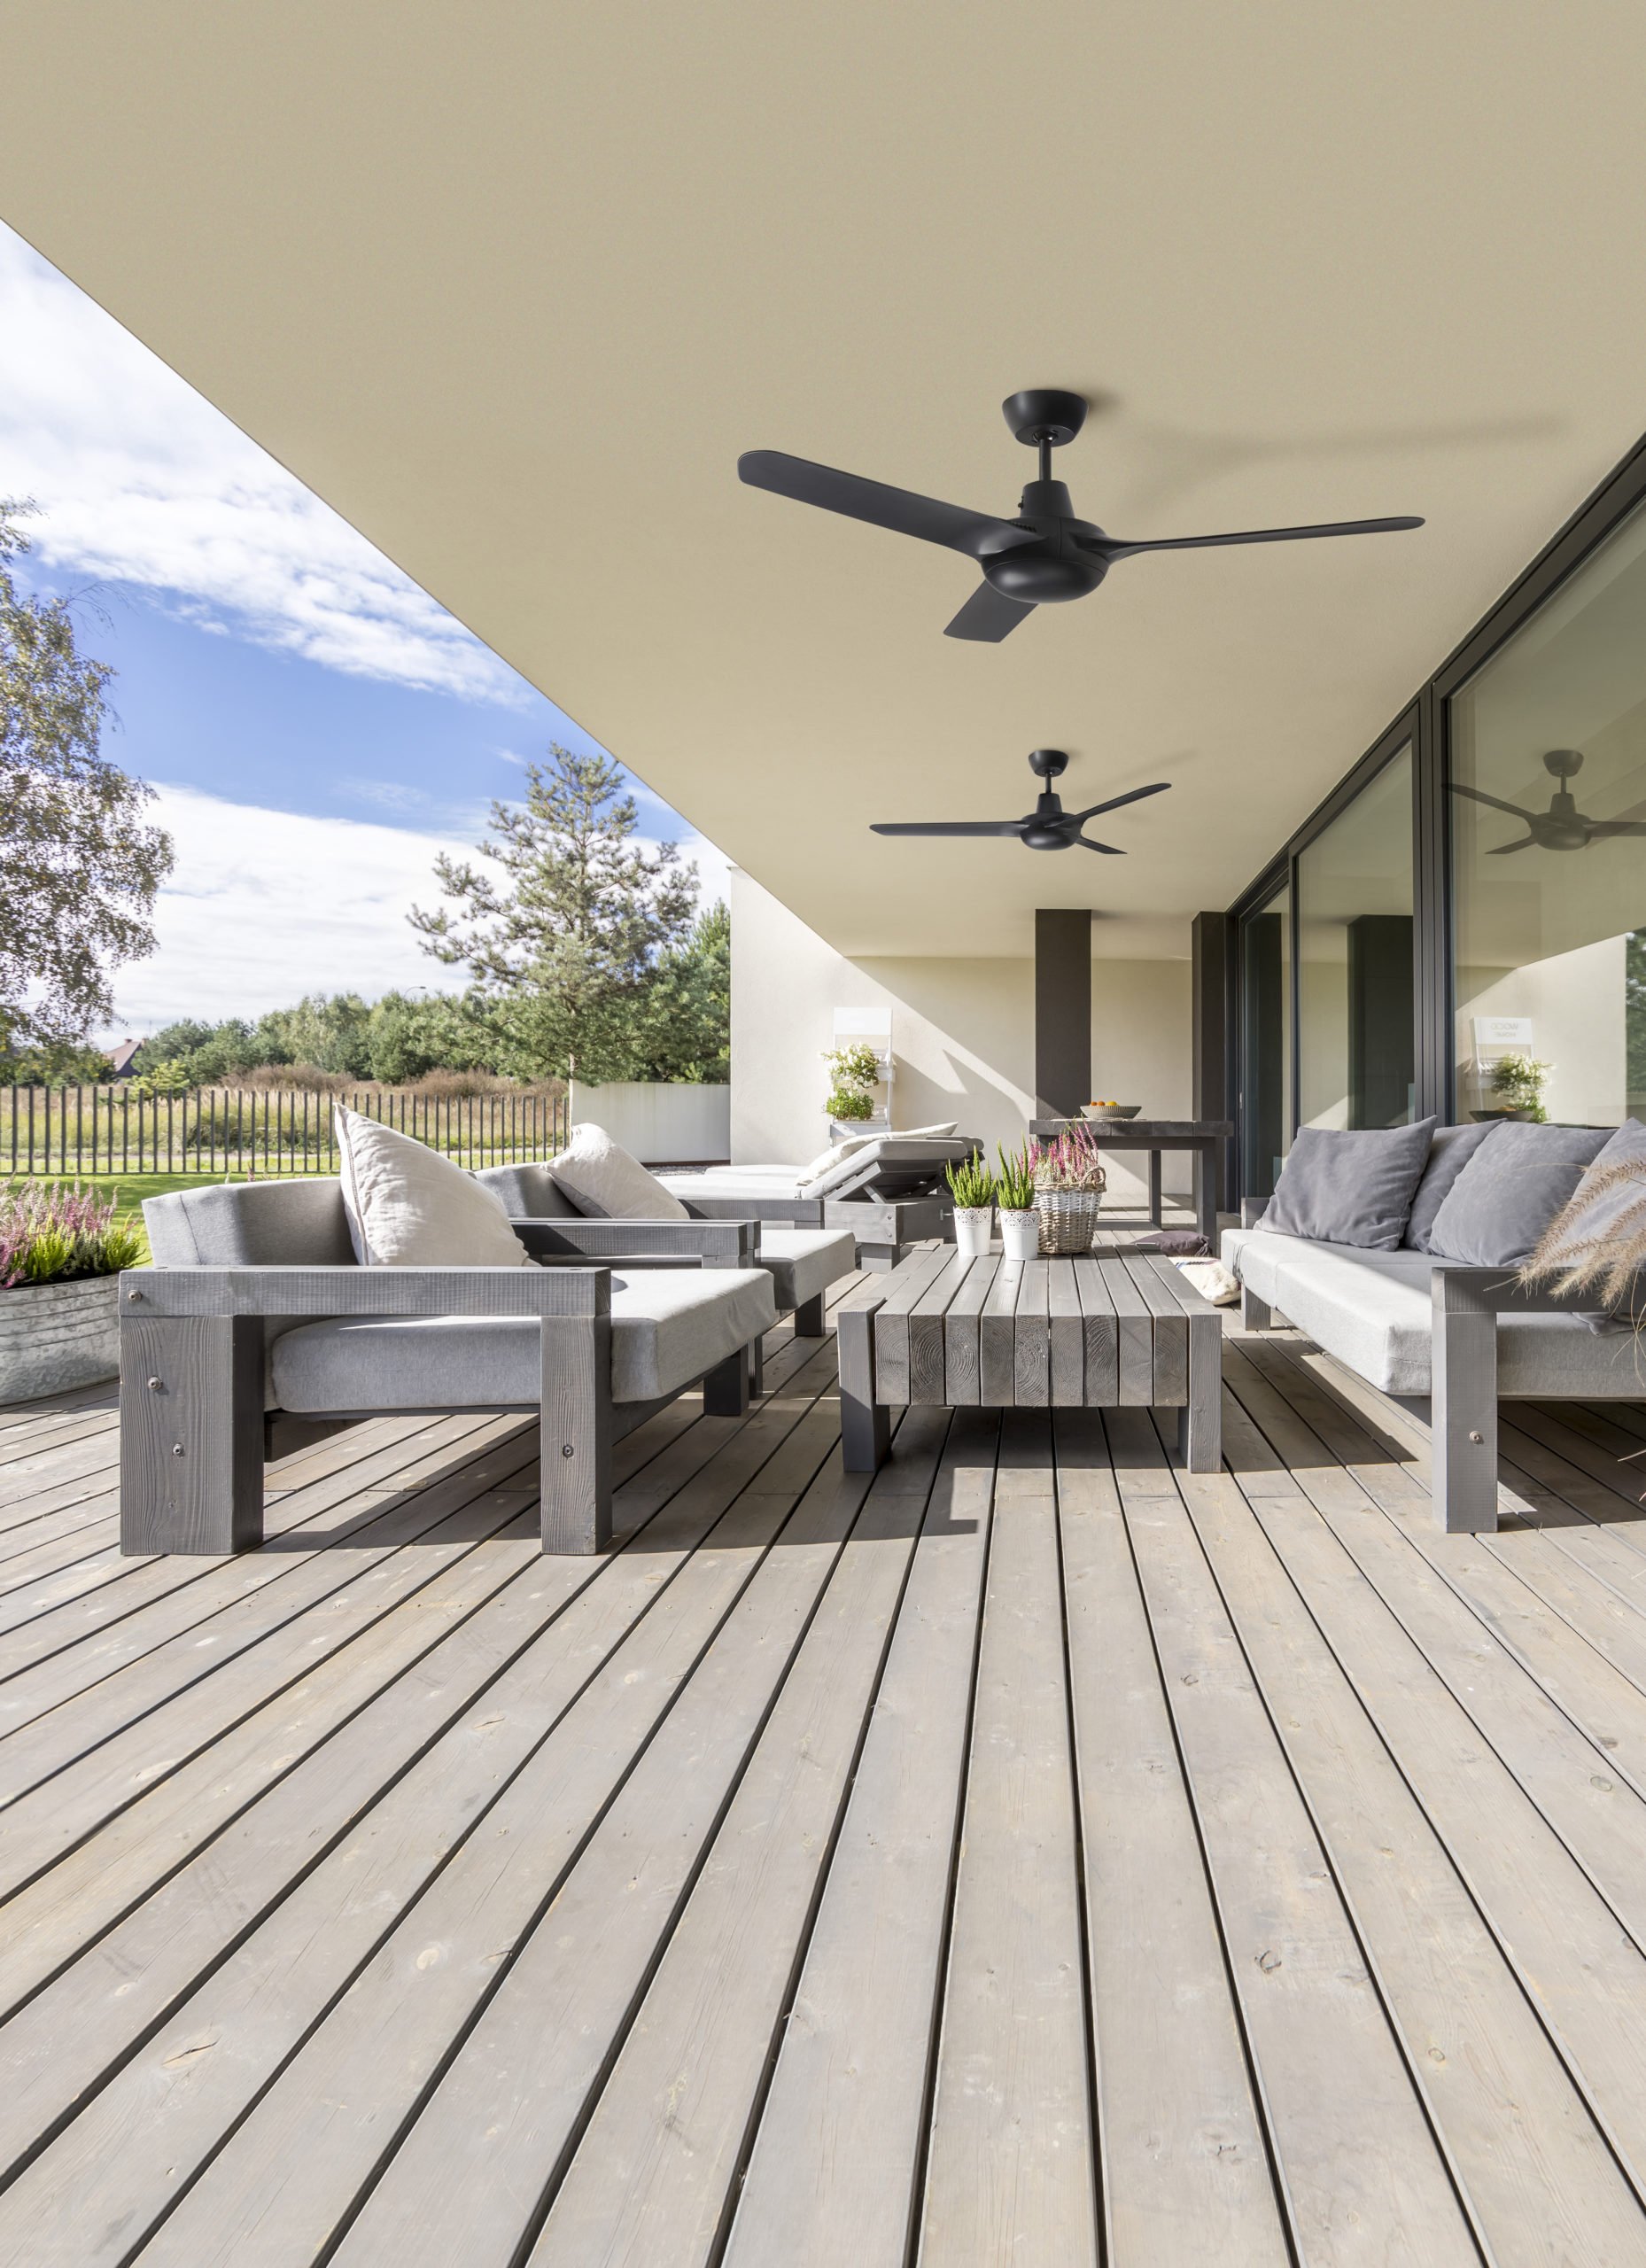 outdoor ceiling fans